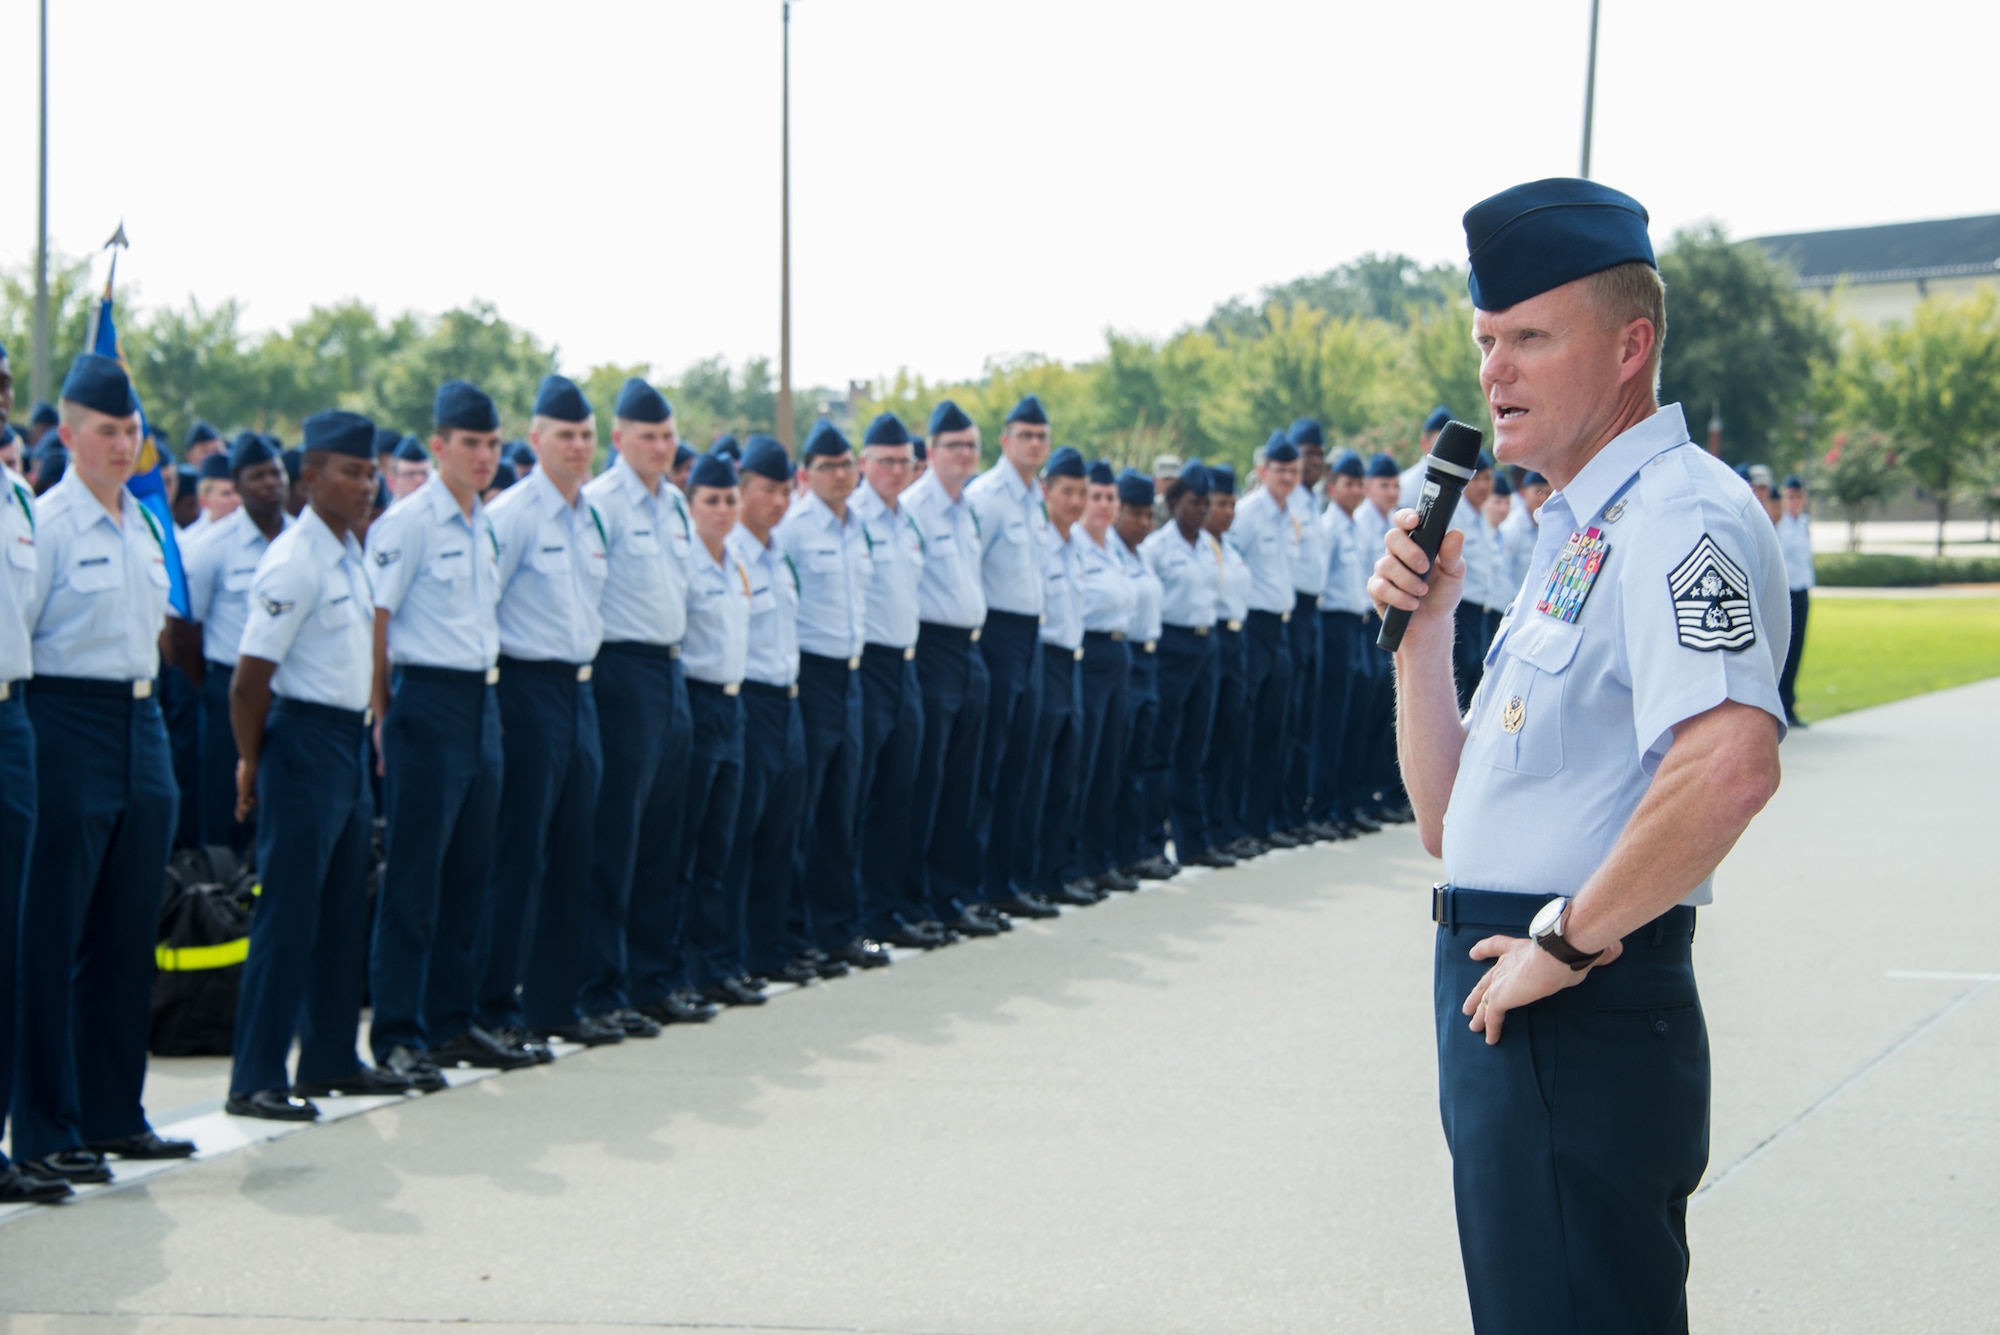 Chief Master Sgt. of the Air Force James A. Cody addresses non-prior service students on the parade field during a two-day visit of at Keesler Air Force Base, Miss. Sept. 22-23, 2014. The purpose of the visit was to thank  Keesler AFB members and further understand the various missions here, including 2nd Air Force, 81st Training Wing and the 403rd Wing. (U.S. Air Force photo/Marie Floyd)